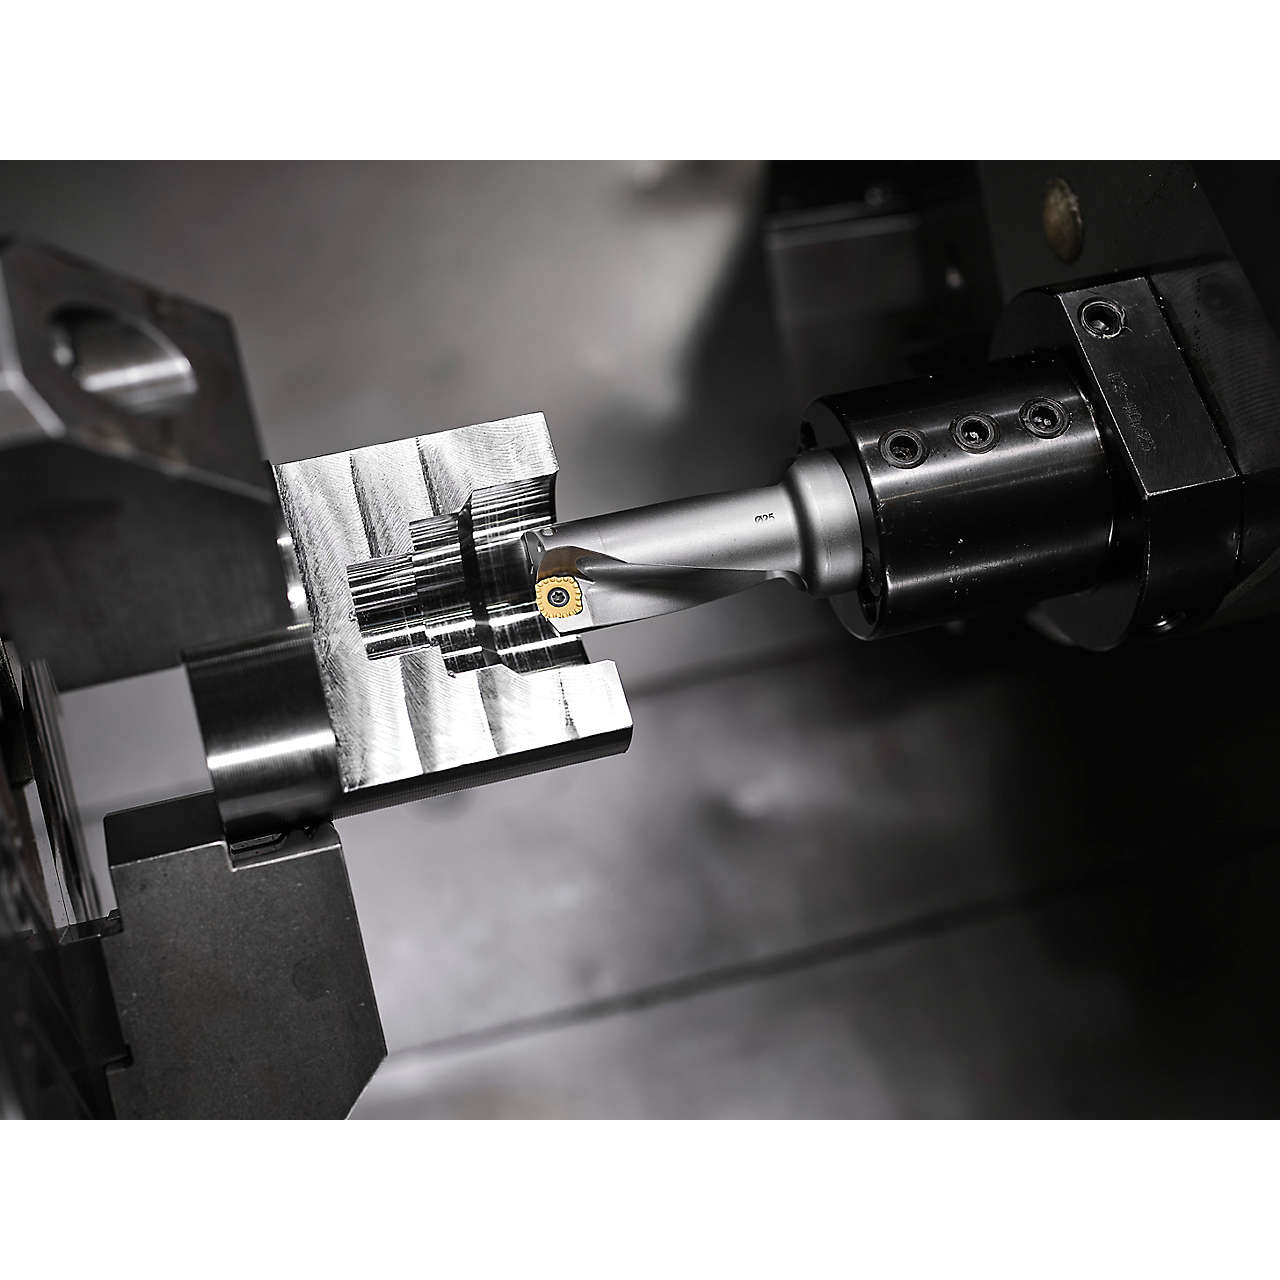 Drill fix pro indexable drill with a workpiece